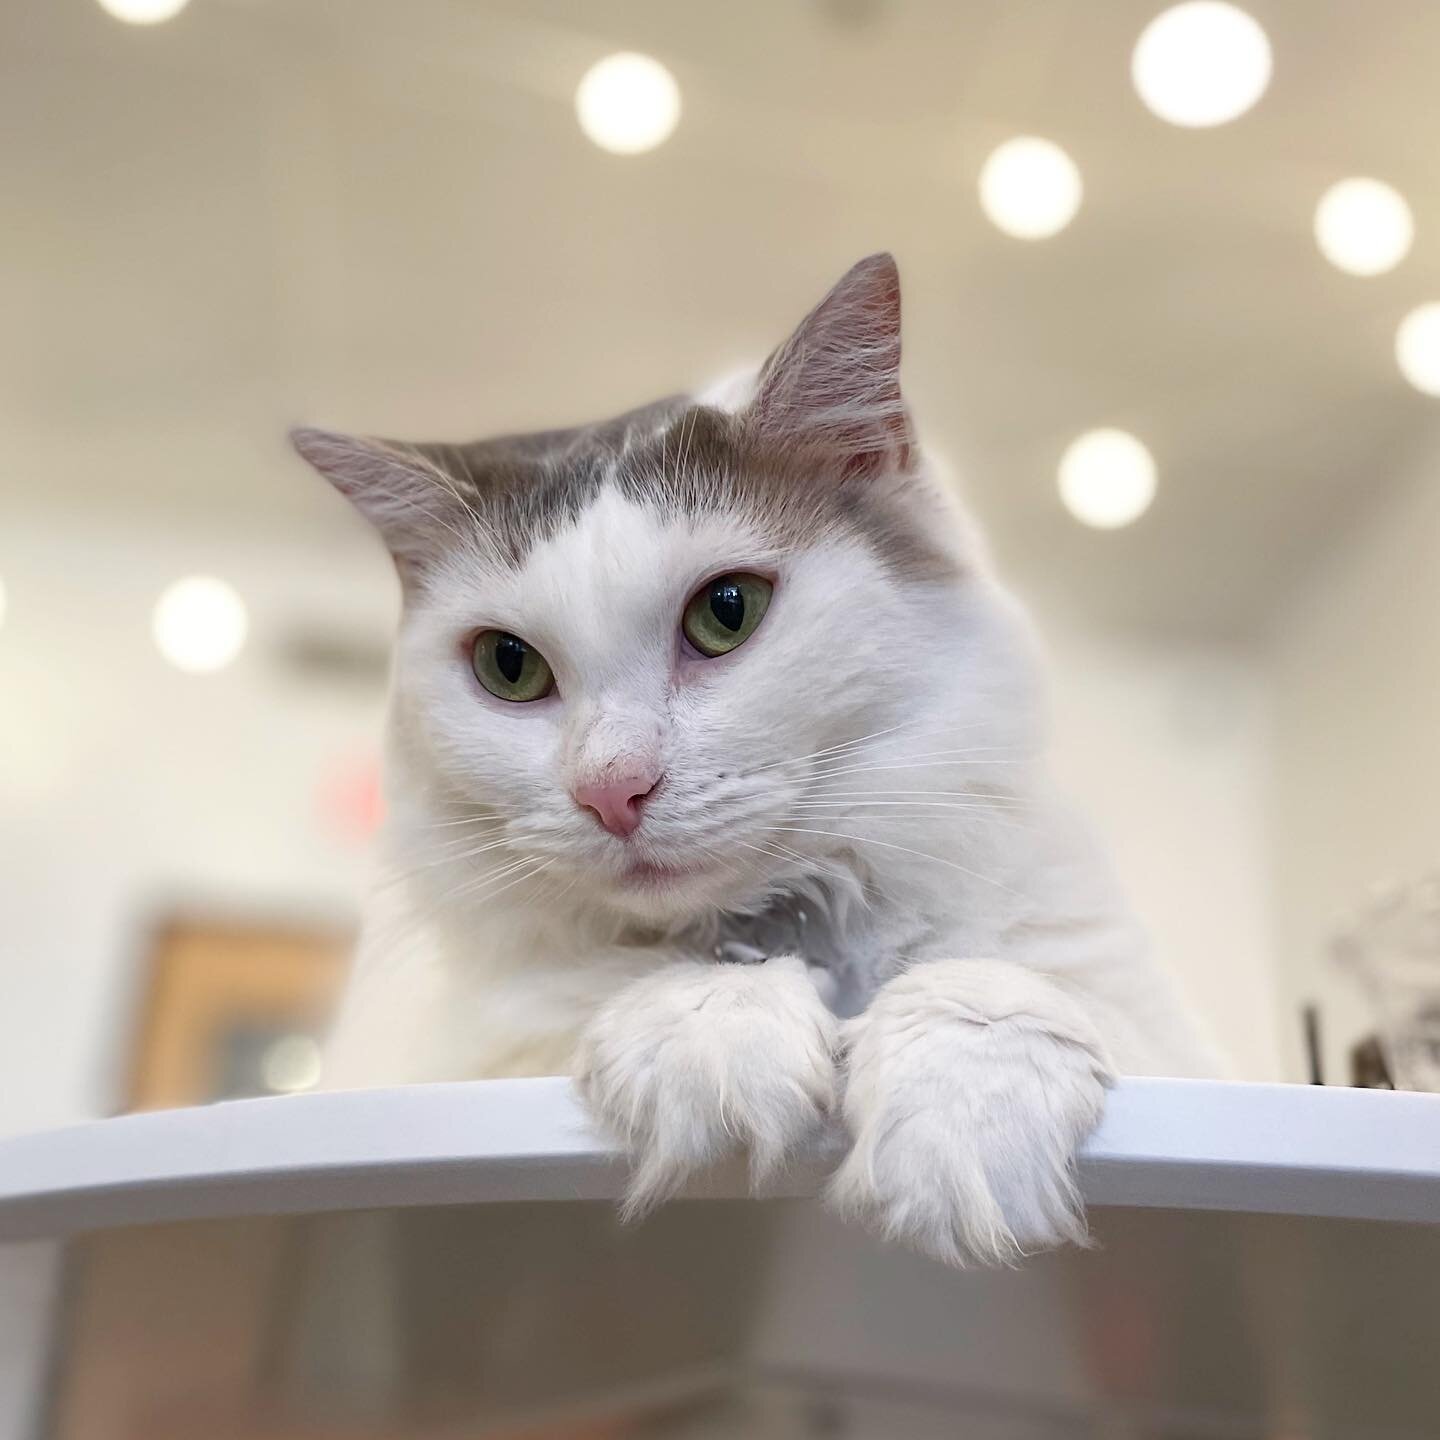 Y&rsquo;all. Valencia is STILL HERE!!!! 😭

Valencia has been with us at the cafe for over 4 months and is still waiting on her forever family. We just don&rsquo;t understand how such a beautiful, smart, loving, playful, and goofy cat could still be 